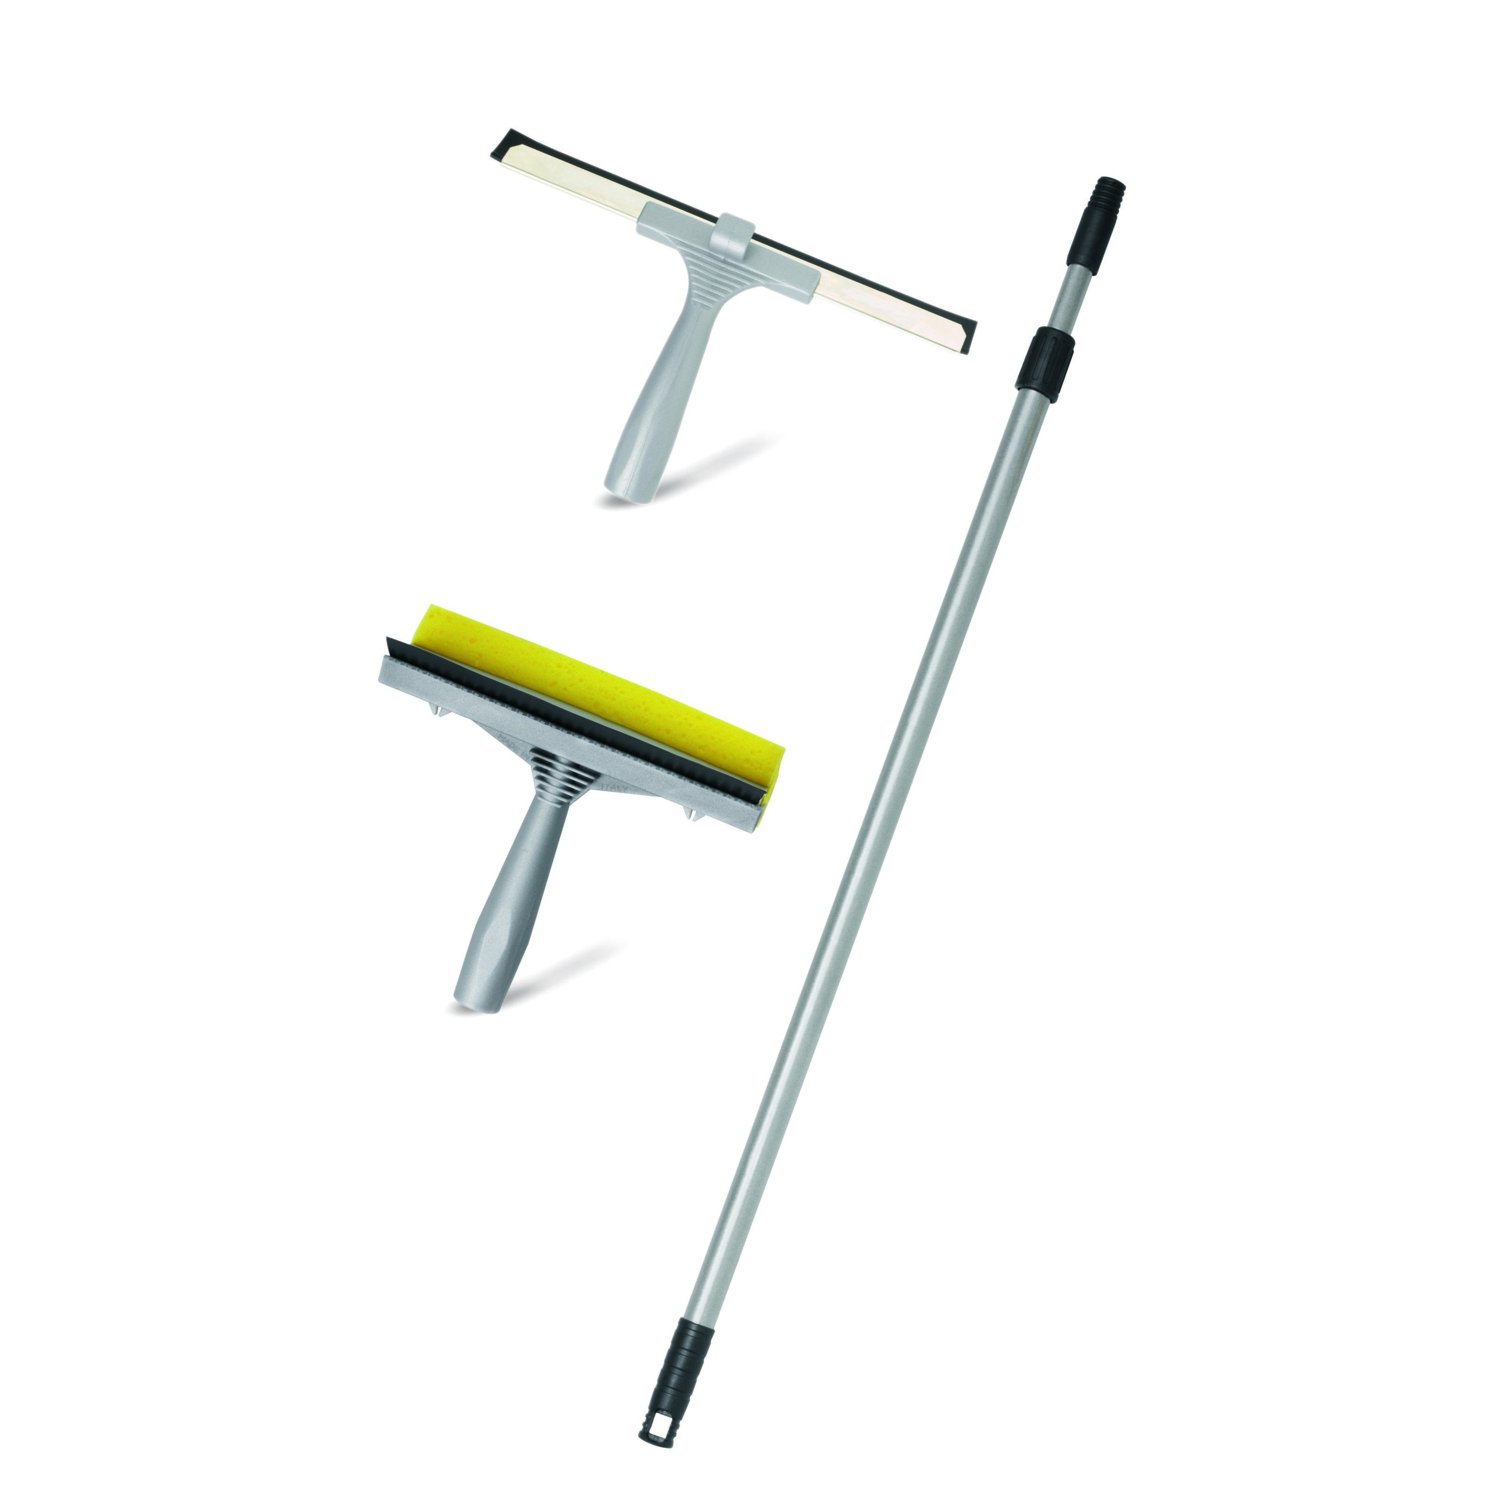 Addis 3 in 1 Window Cleaning Set Image